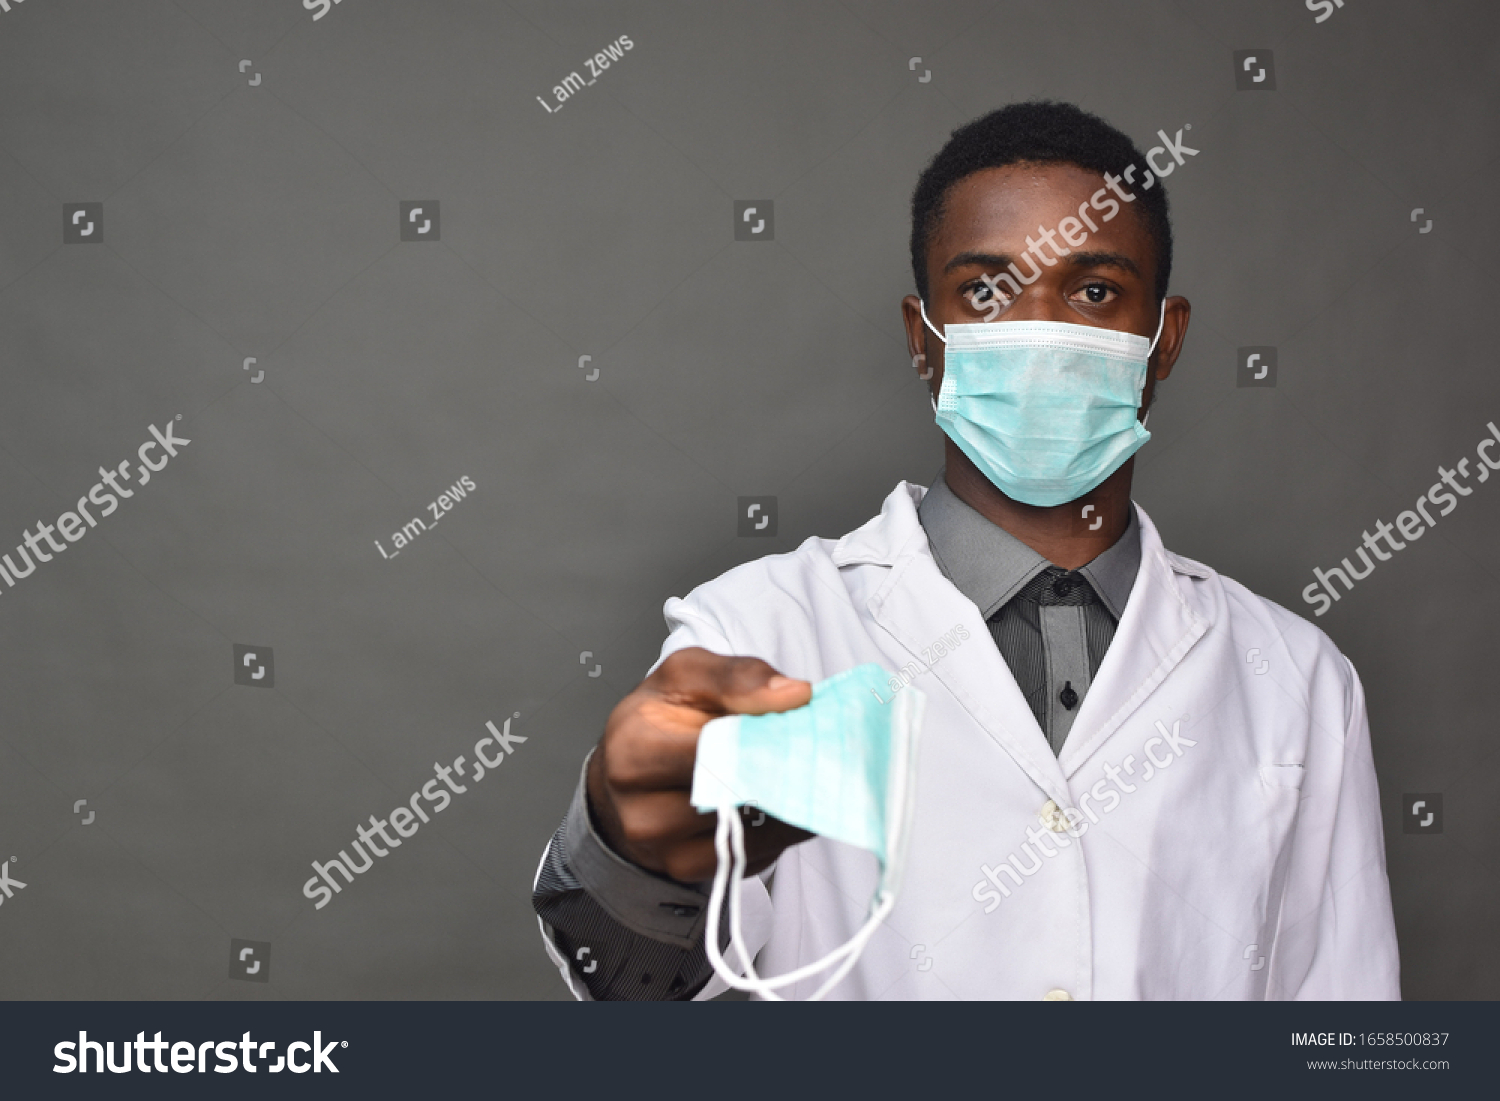 young black man in medical field, wearing a white coat and face mask, offering a face mask #1658500837